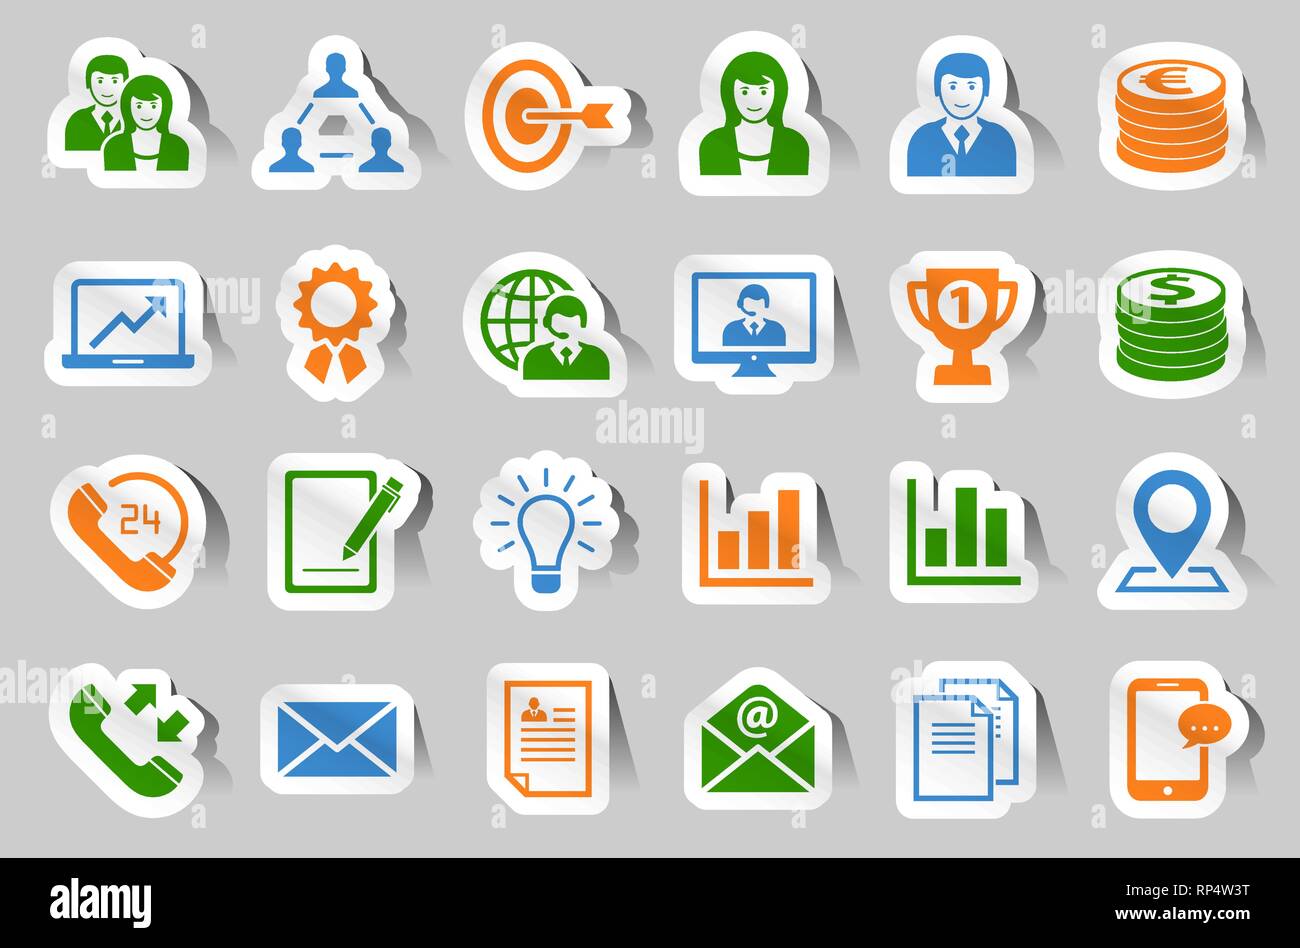 24 different business and office symbol sticker icons Stock Vector